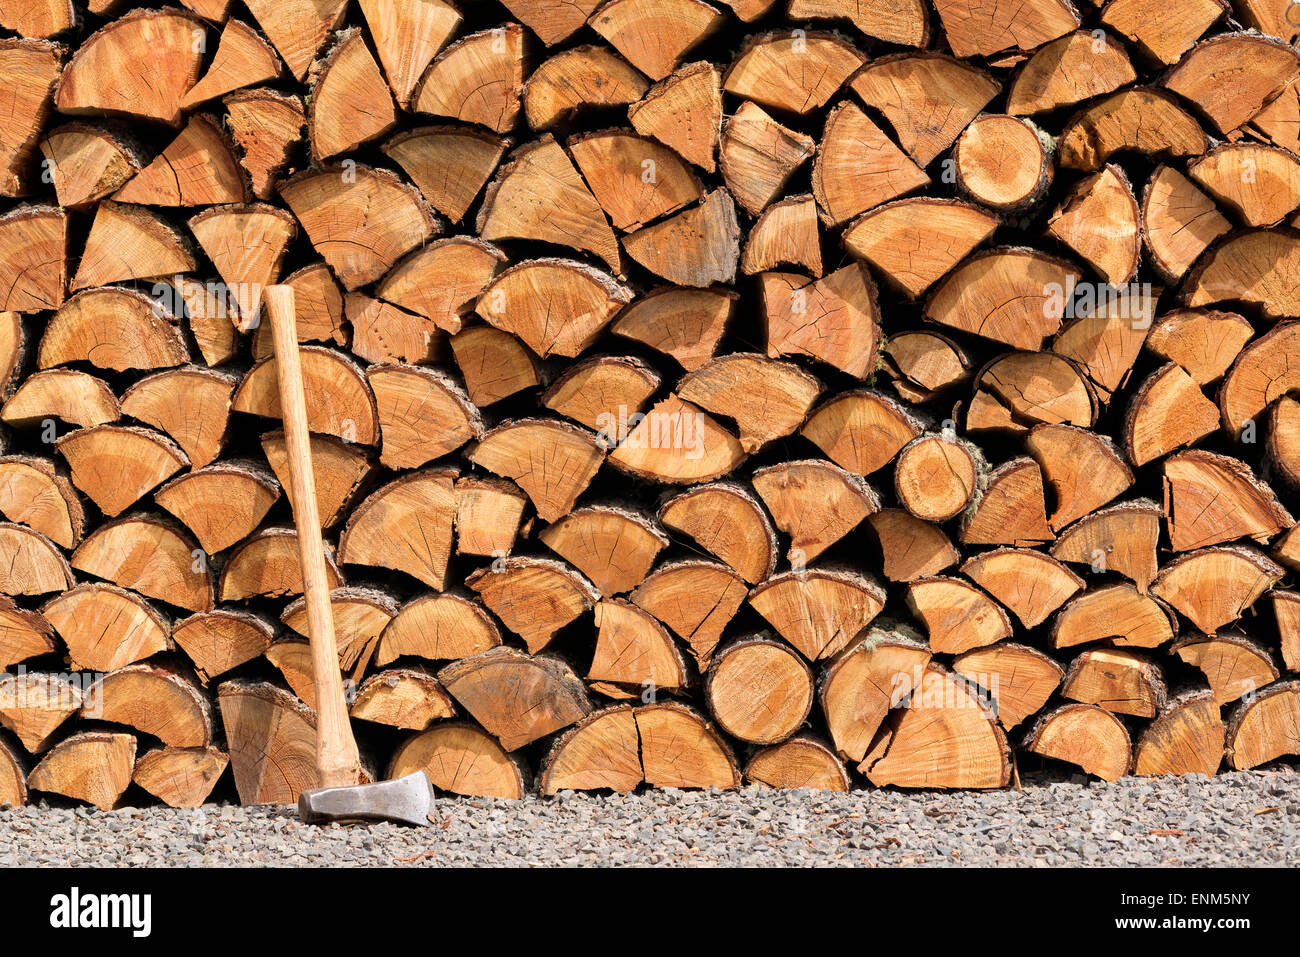 Splitting maul and neatly stacked pile of split firewood. Stock Photo